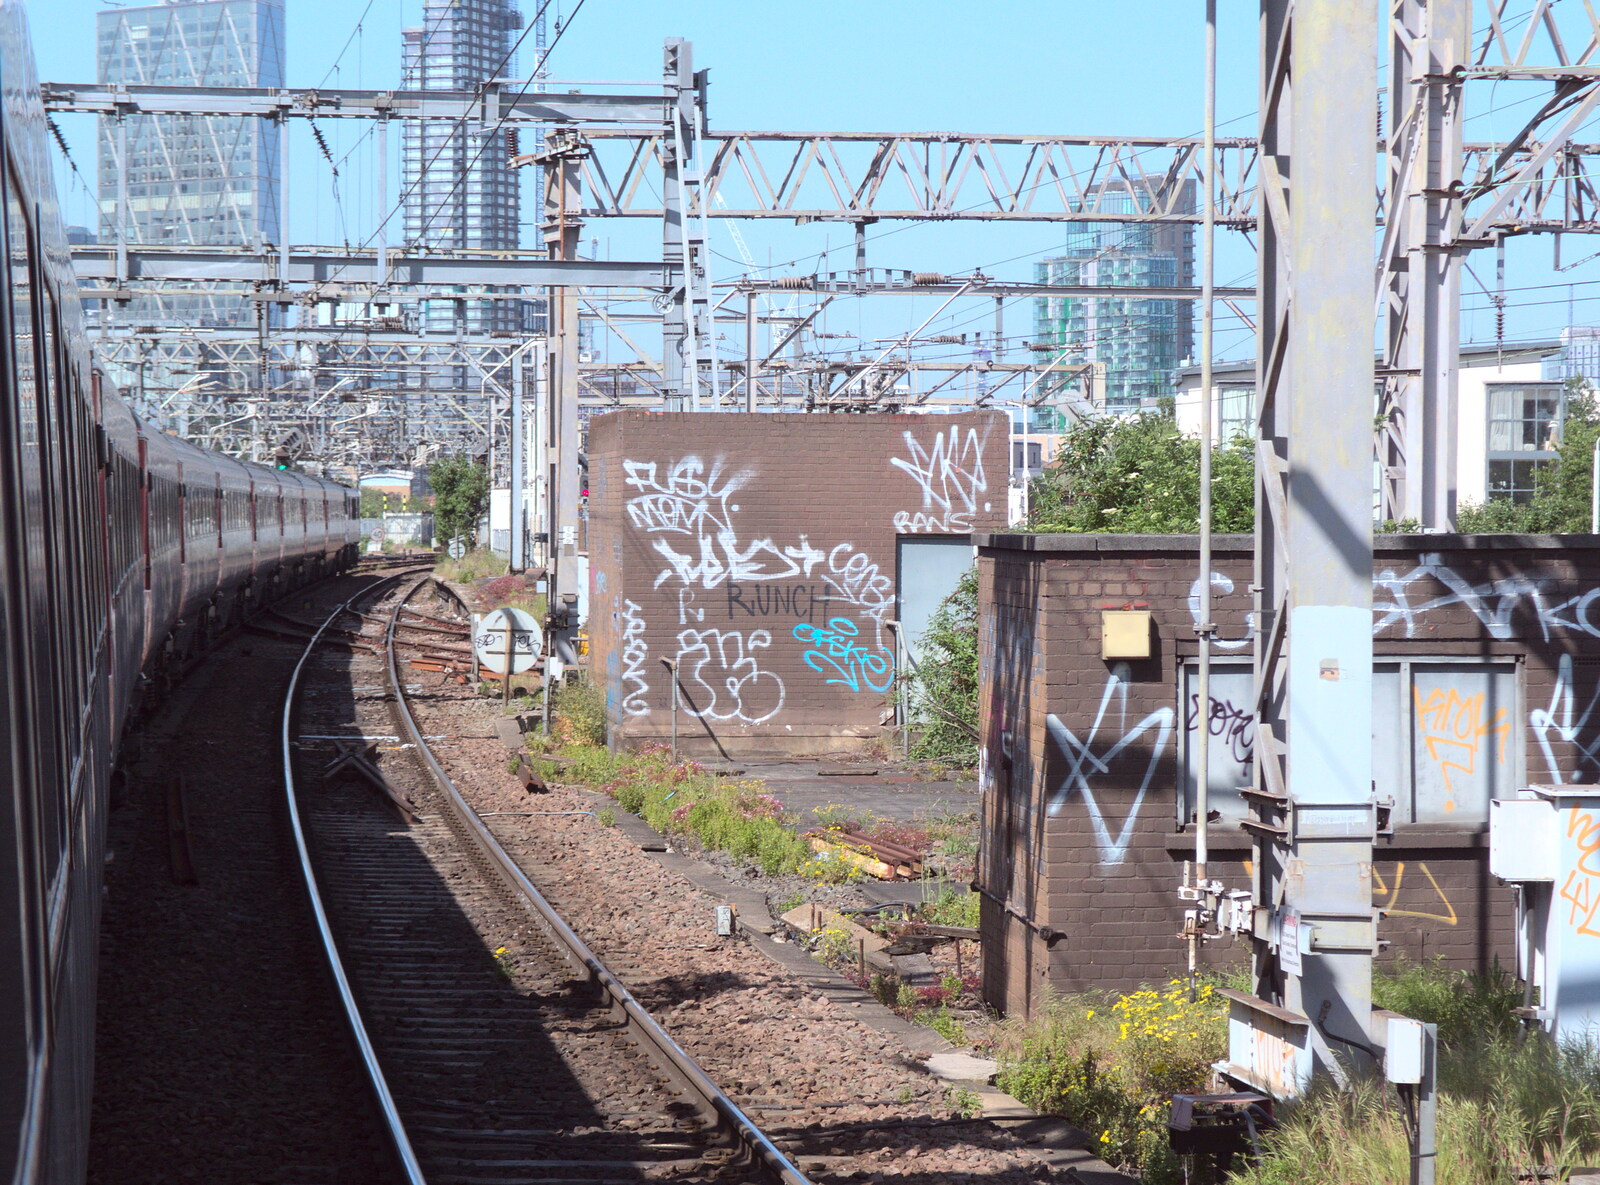 More tags on boxes near Bethnal Green station from May Miscellany and Station 119, Eye Airfield, Suffolk - 18th May 2018